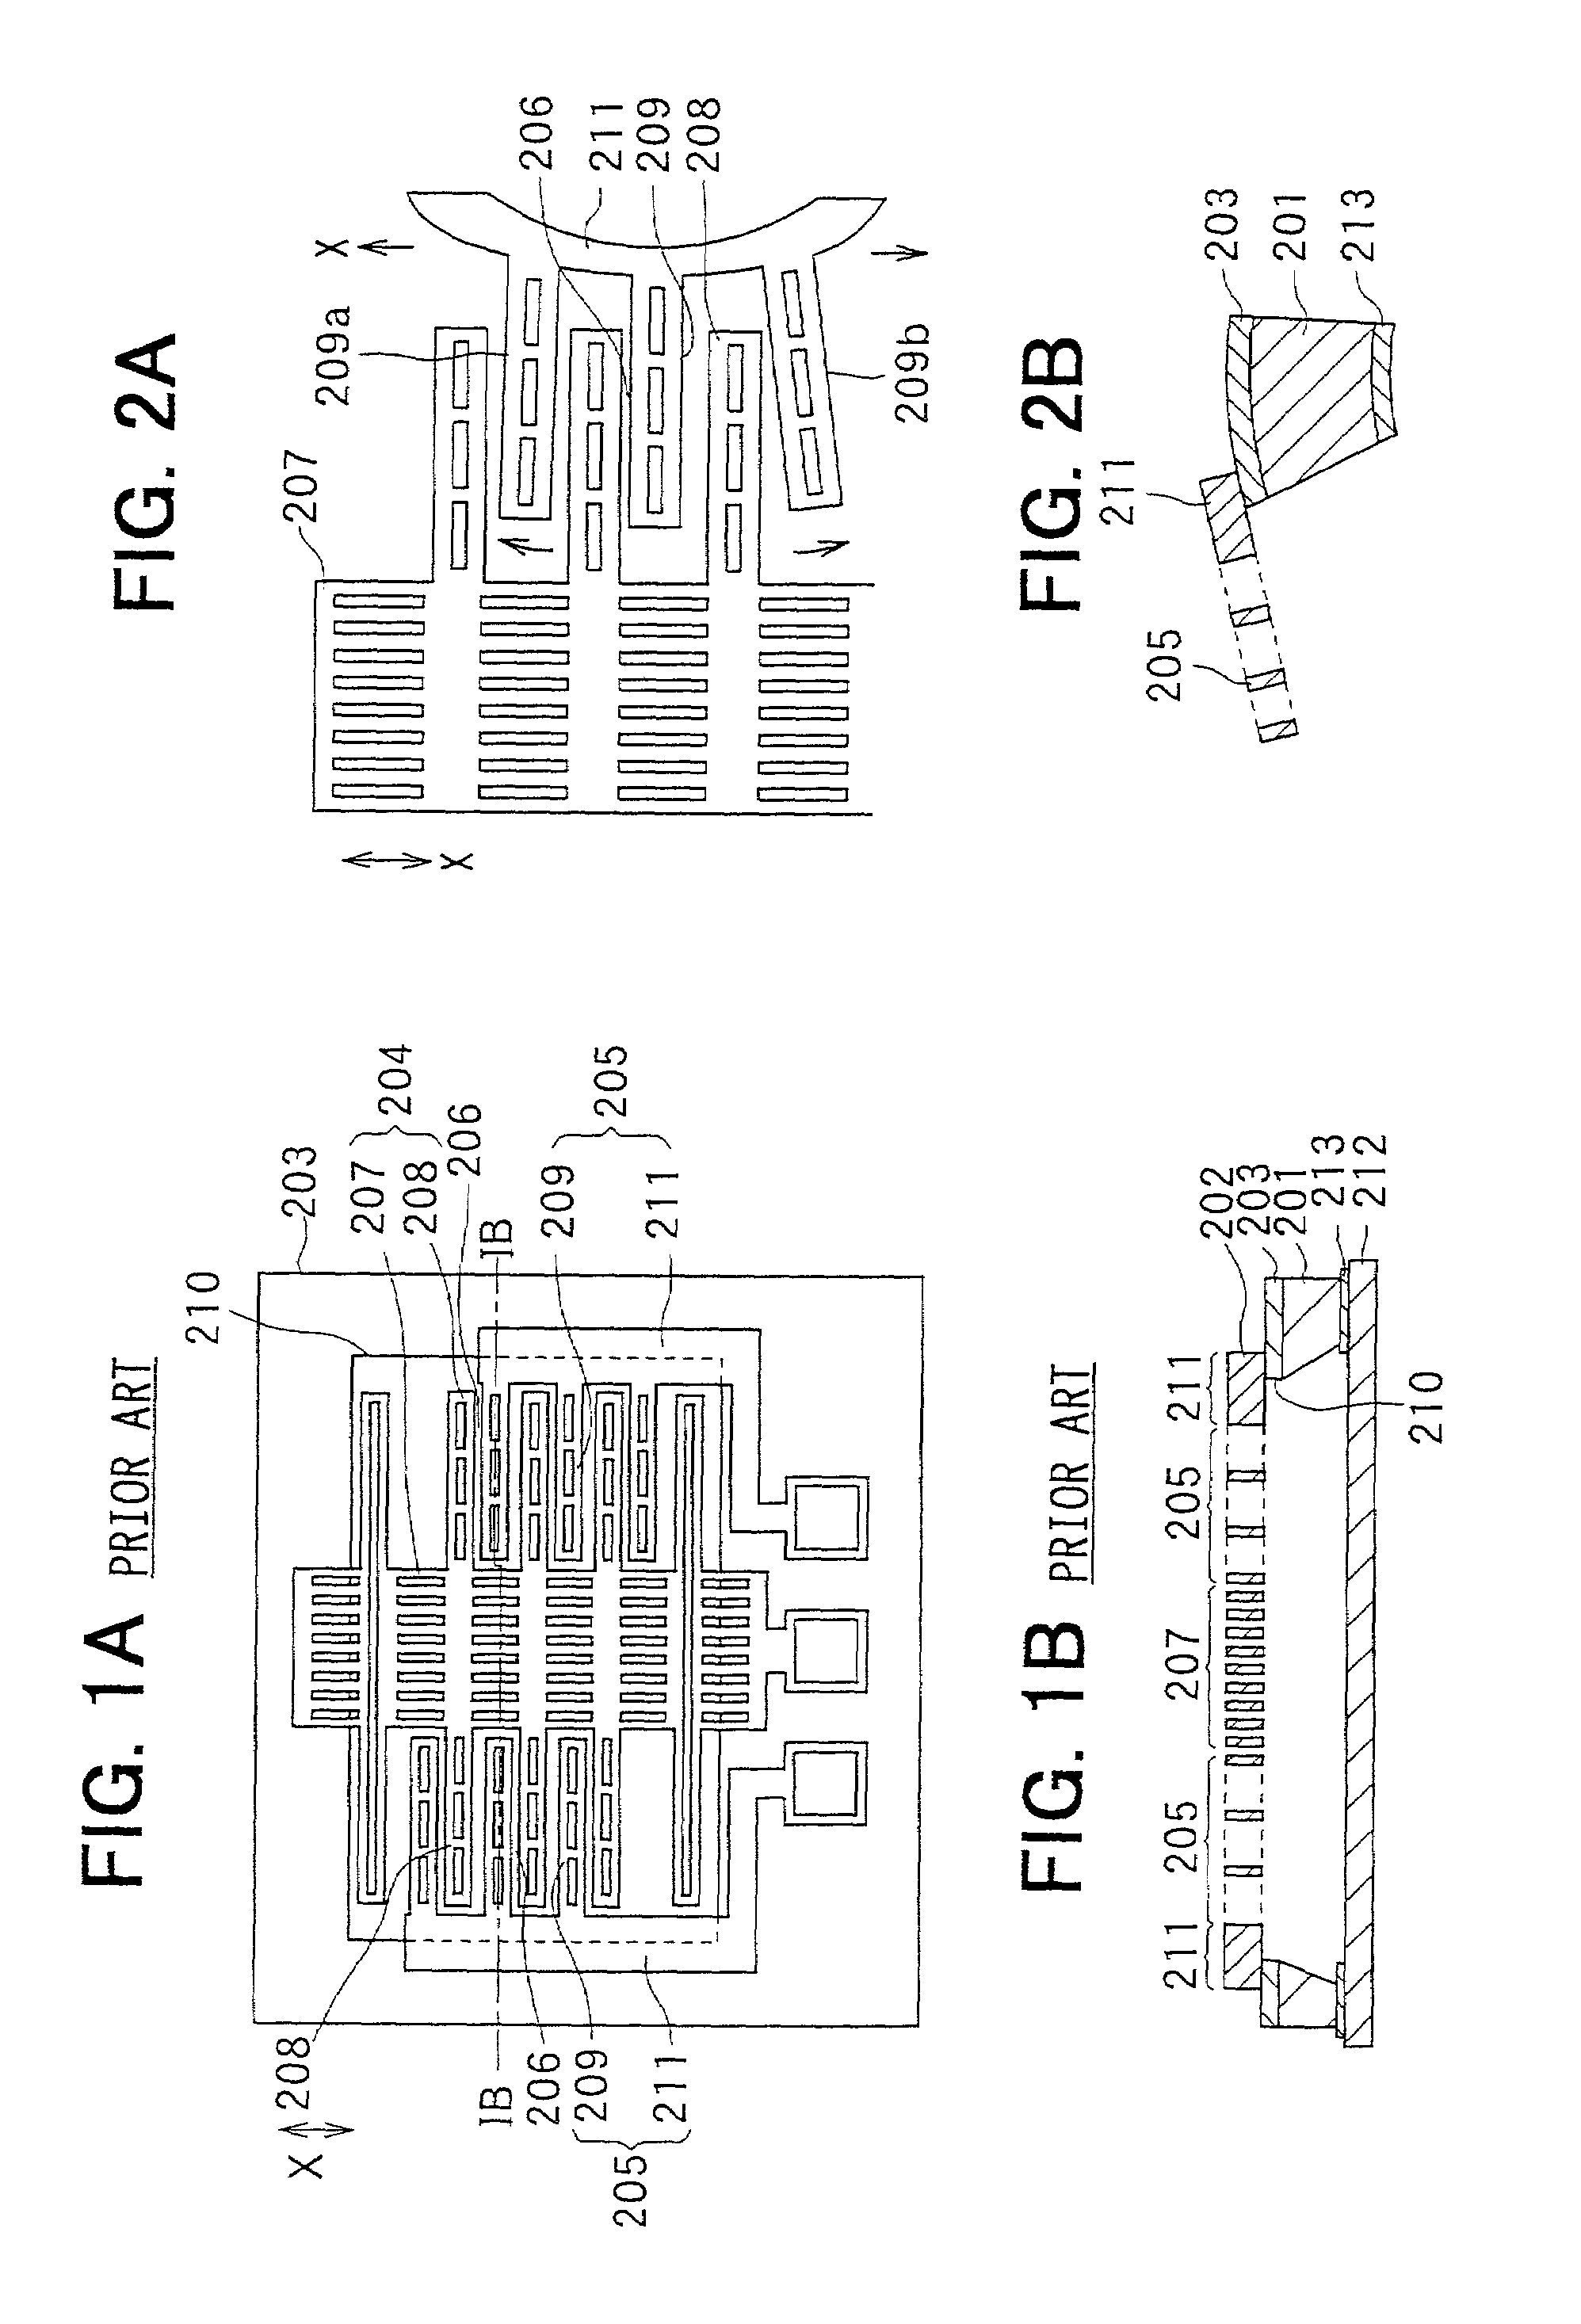 Semiconductor dynamic quantity sensor with movable electrode and fixed electrode supported by support substrate